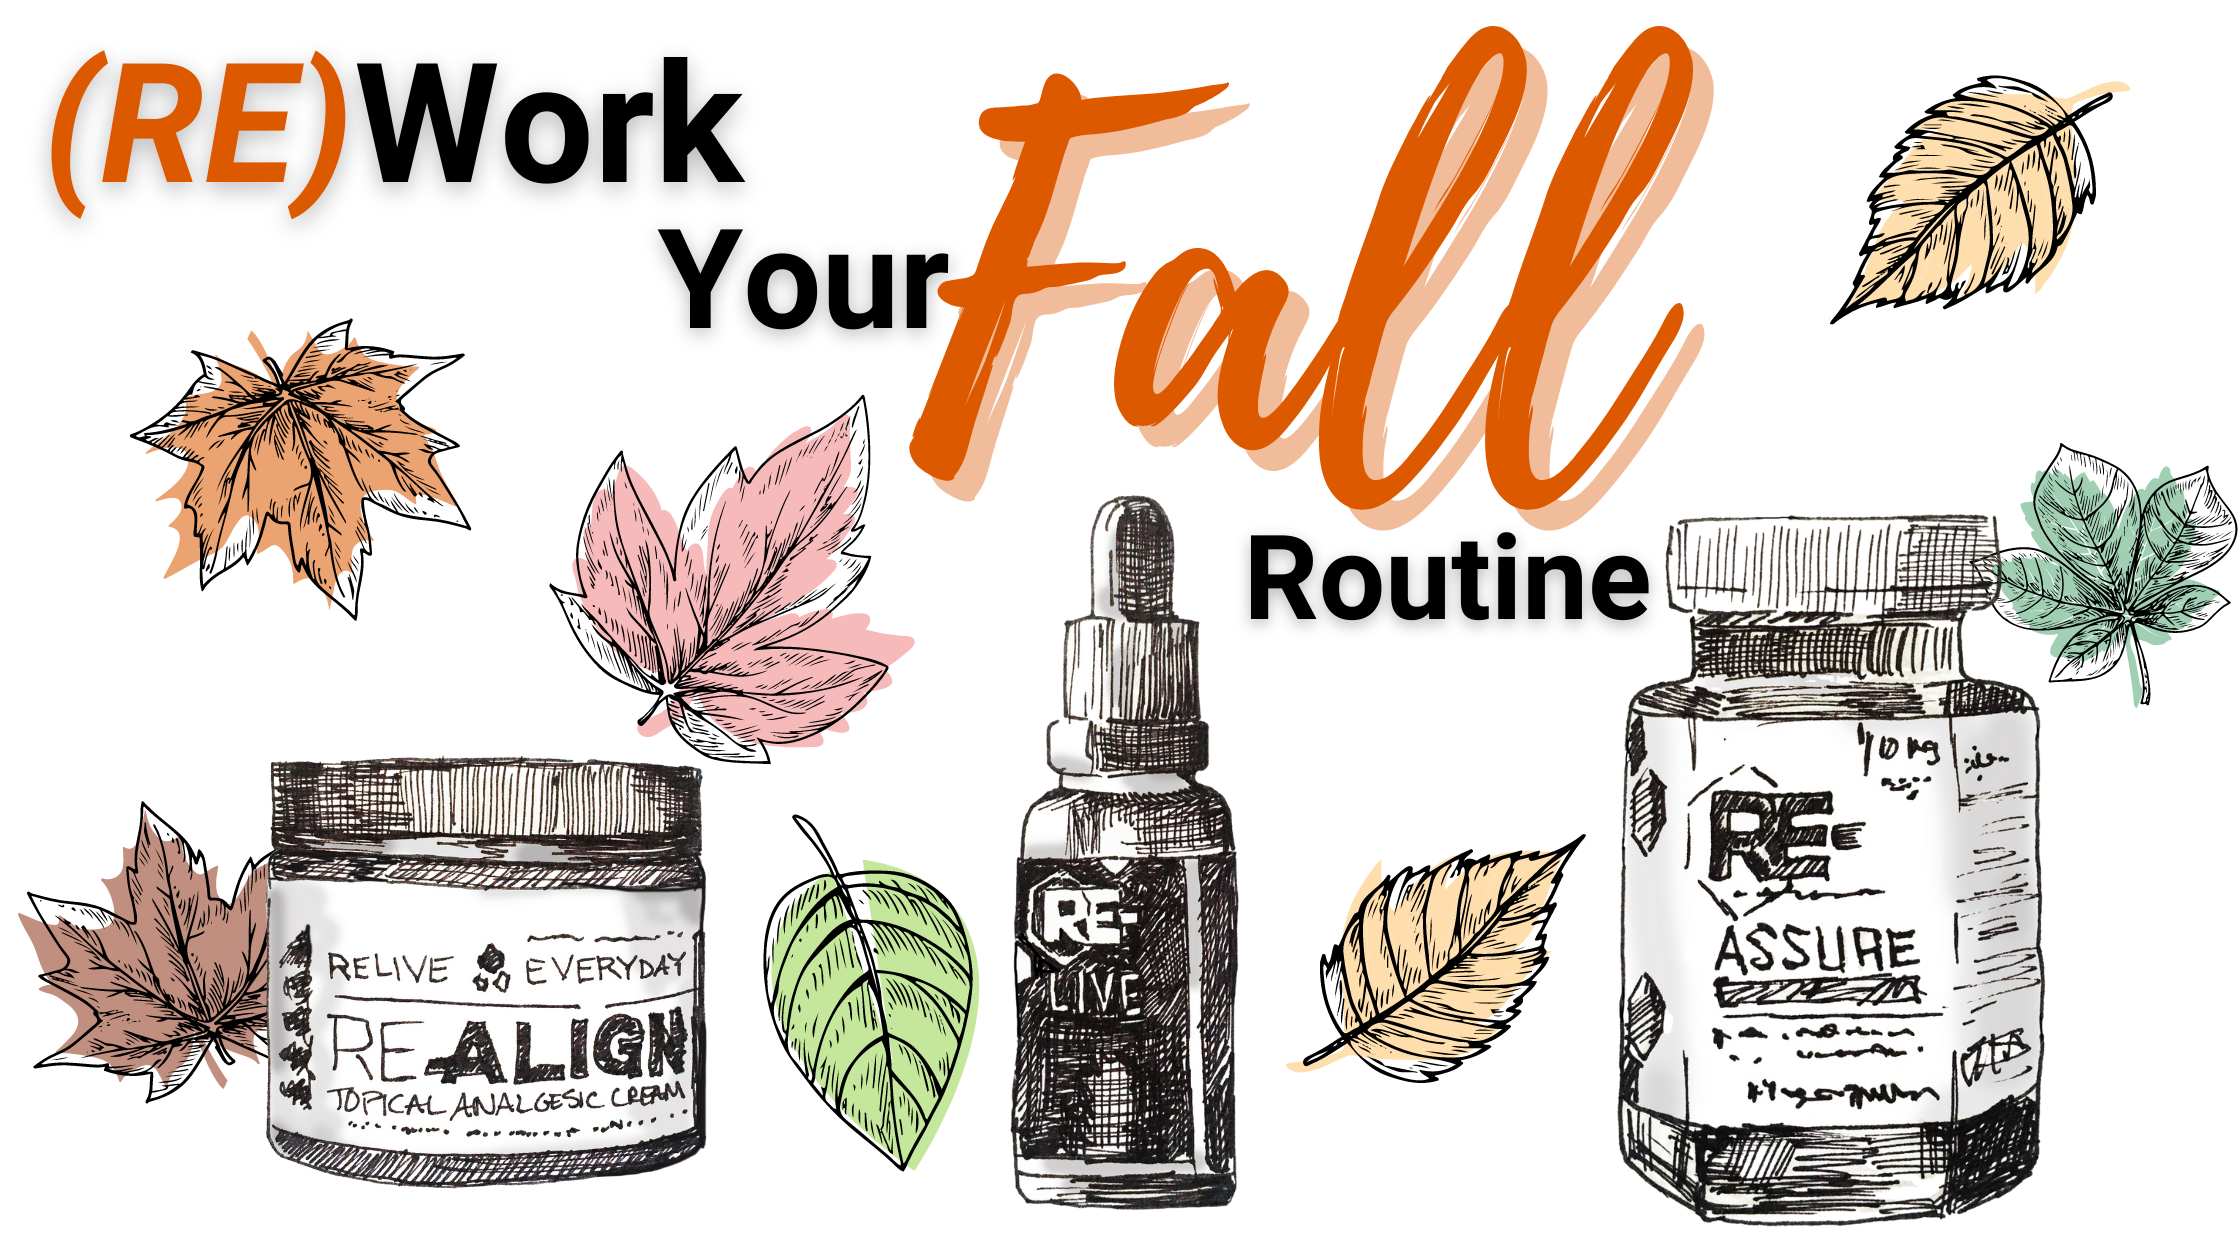 RE-WORK YOUR FALL ROUTINE